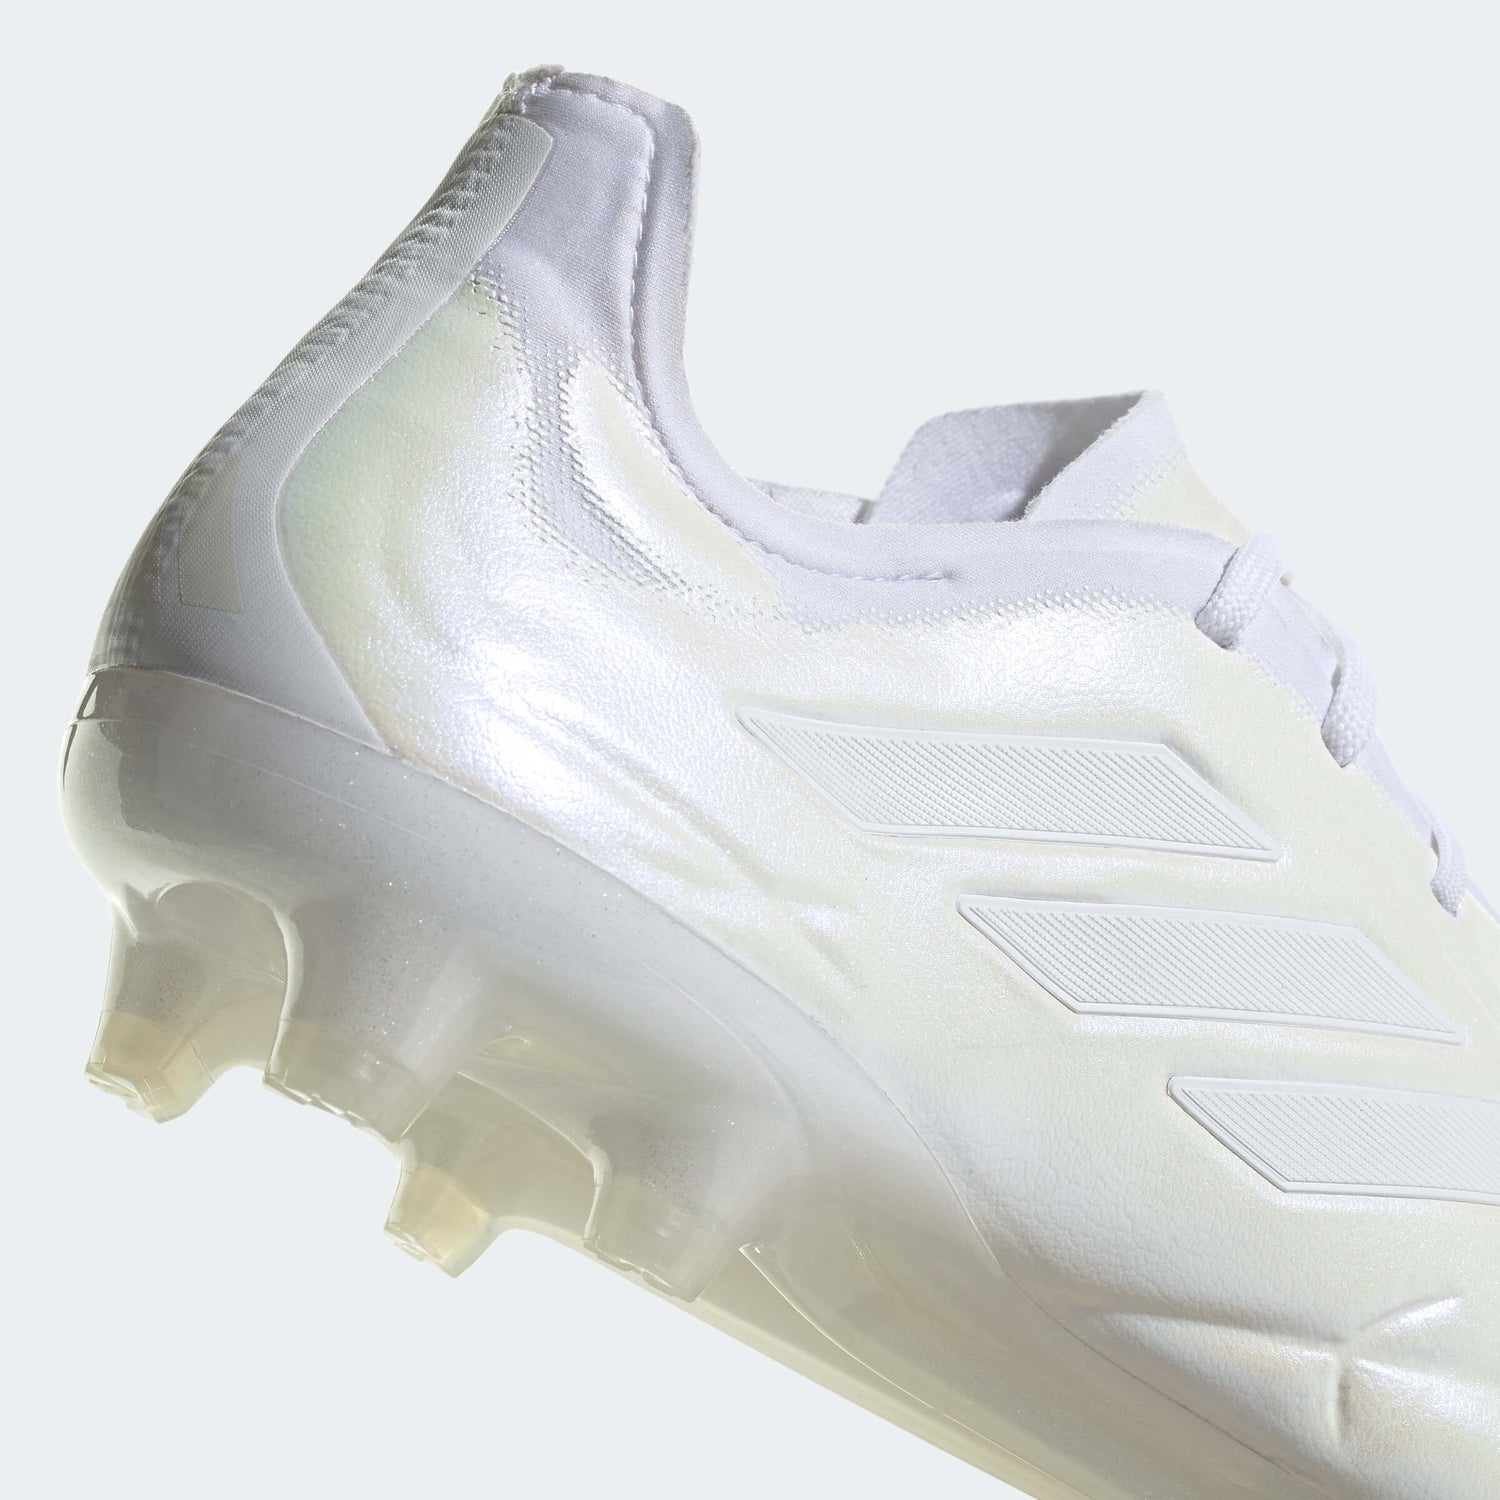 adidas Copa Pure.1 FG -  Pearlized Pack (SP23) (Detail 2)